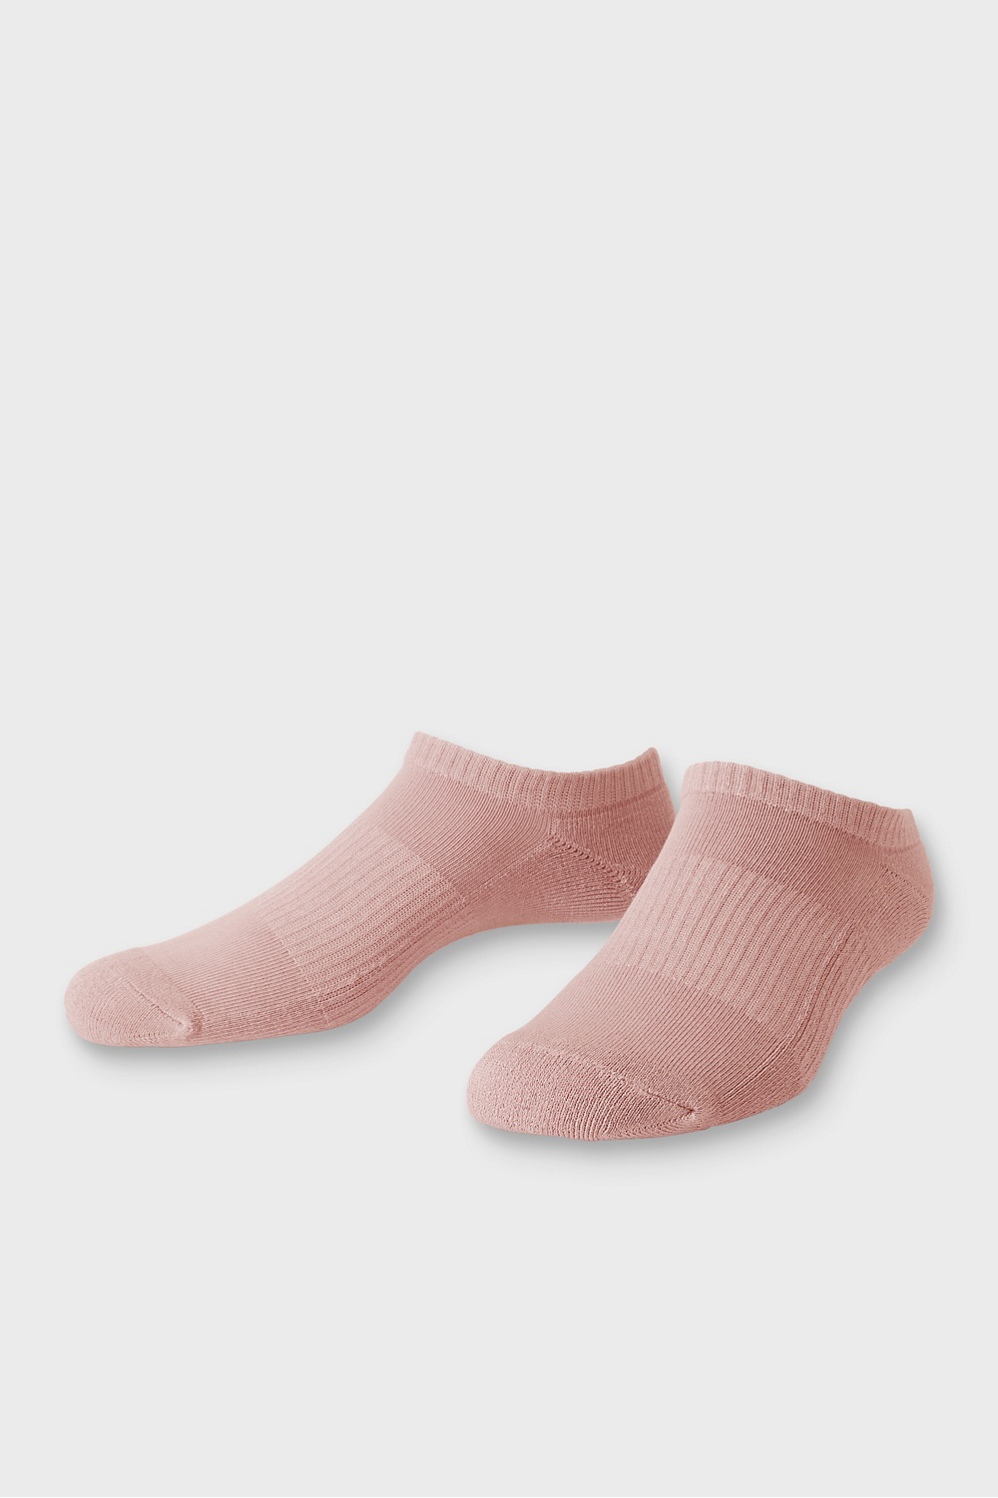 The Performance Ankle Sock